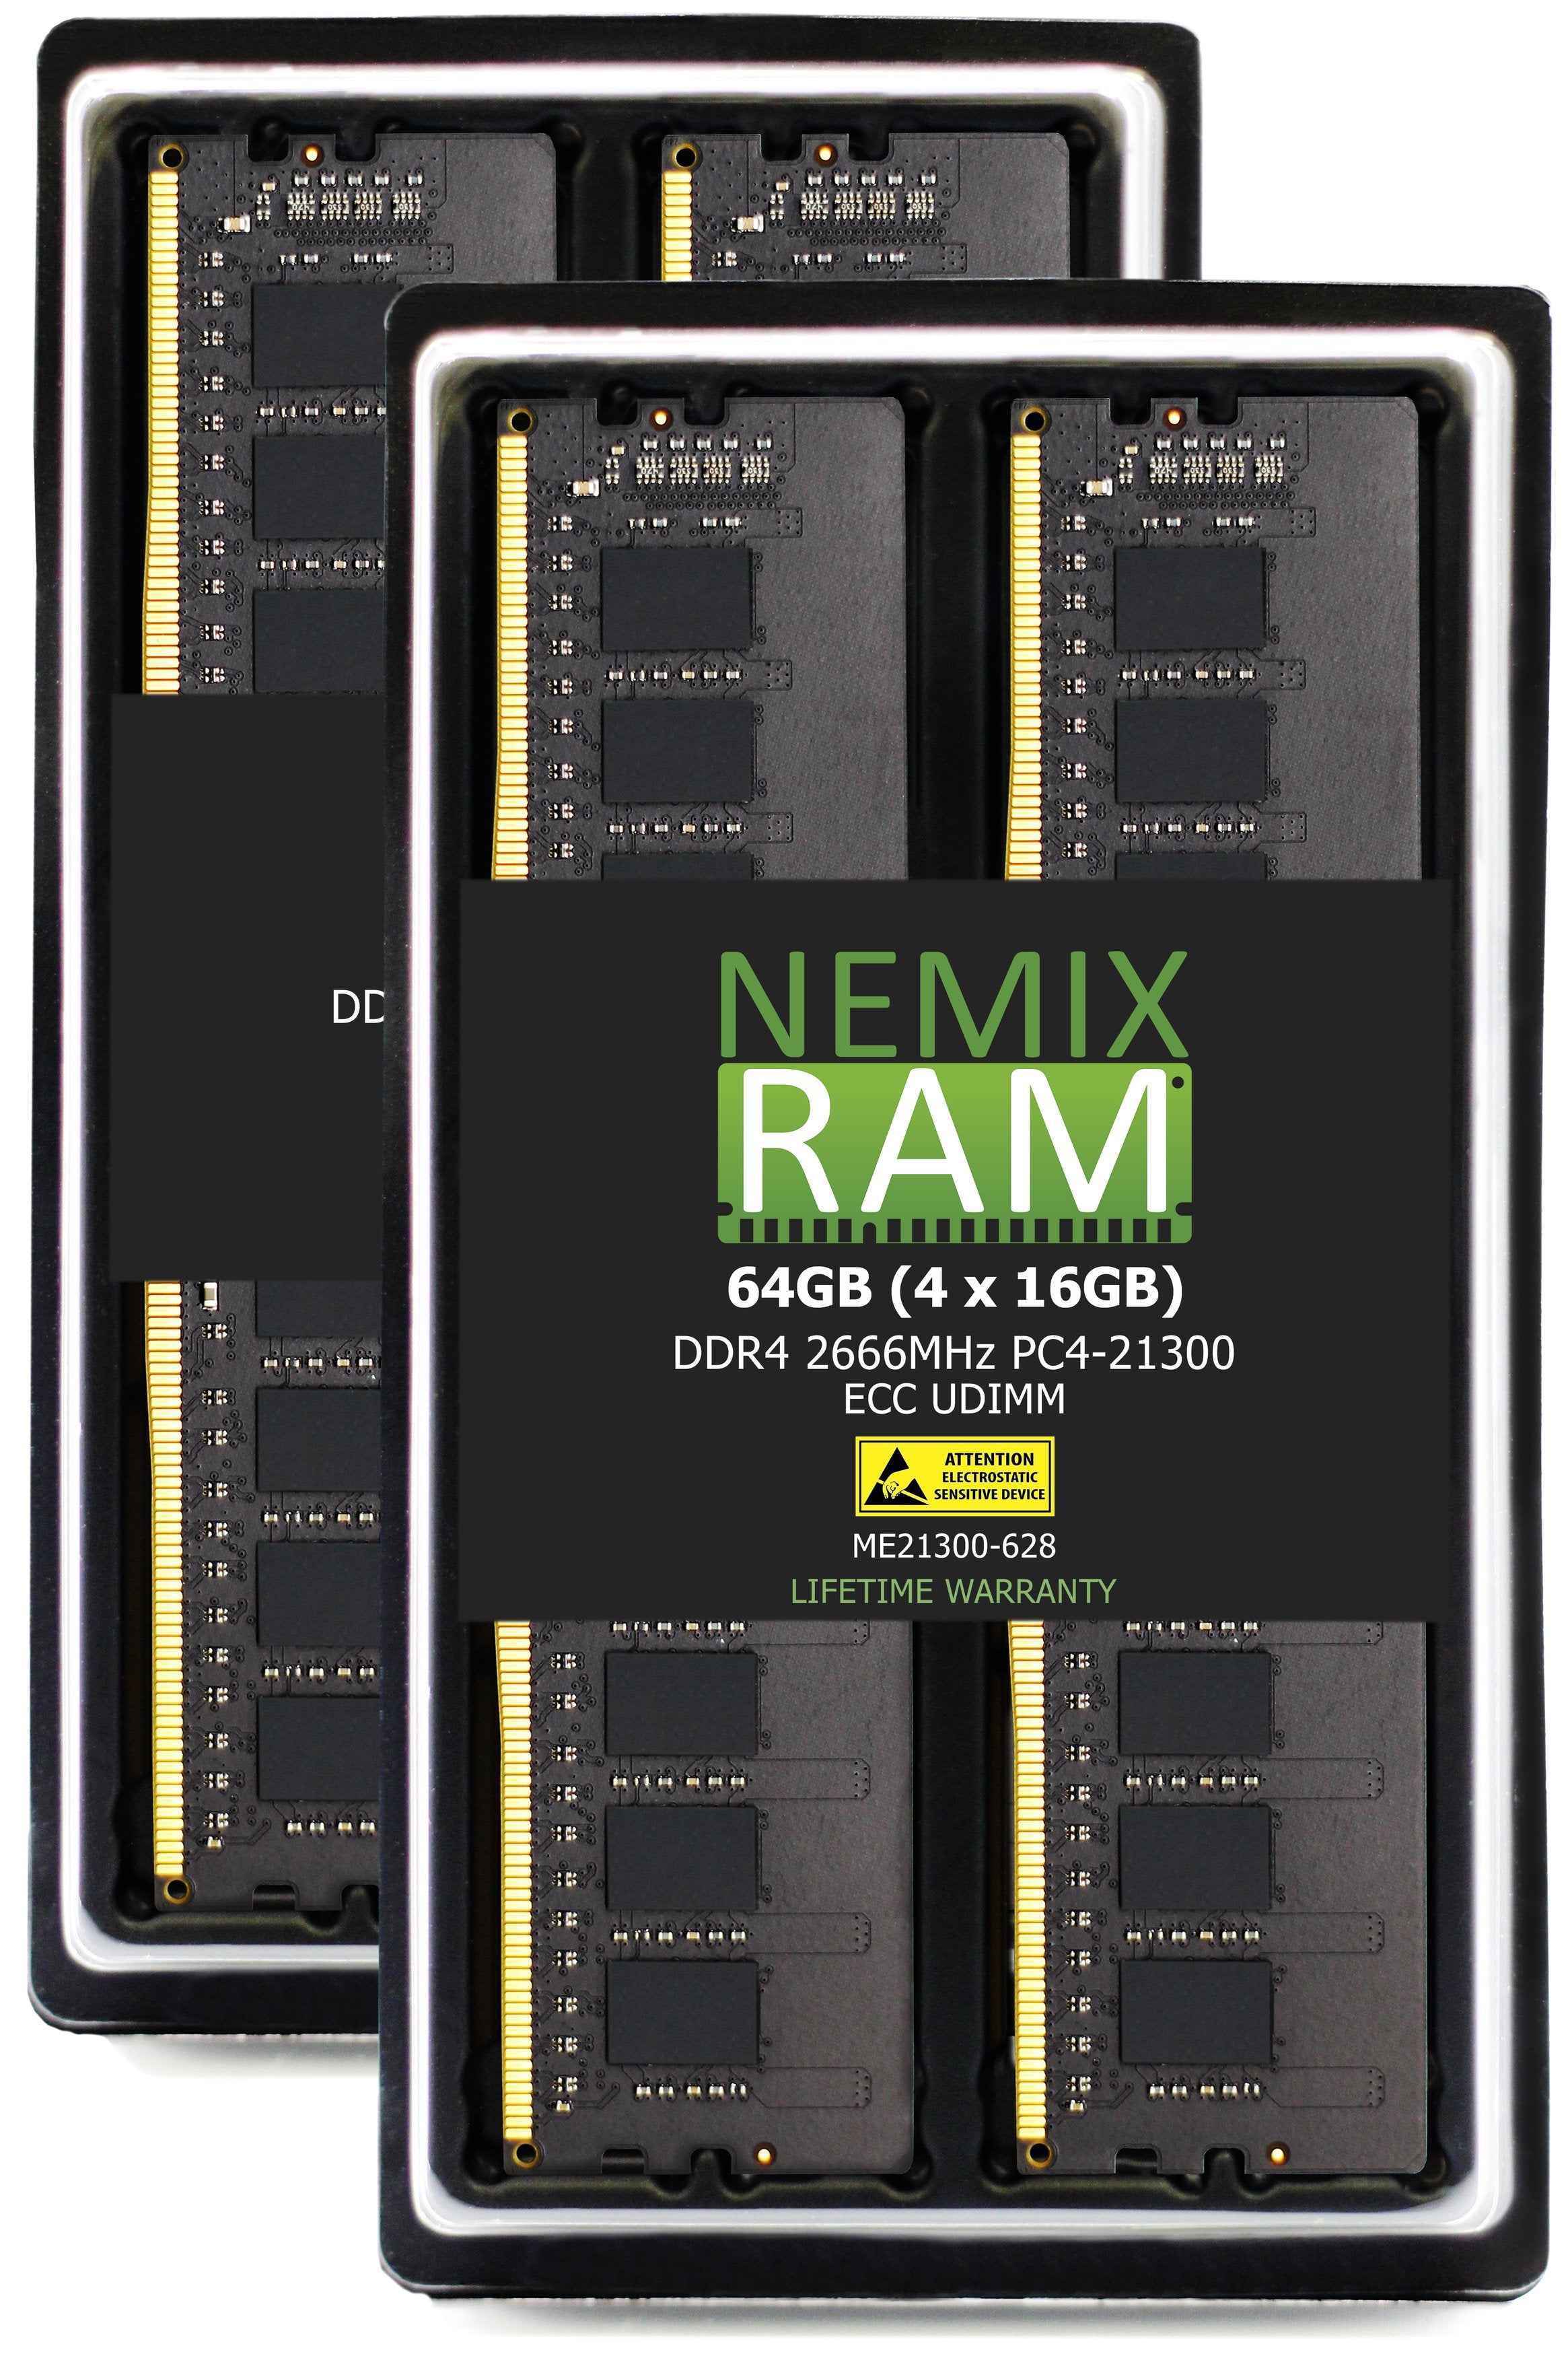 DDR4 2666MHZ PC4-21300 ECC UDIMM Compatible with Synology SA3200D